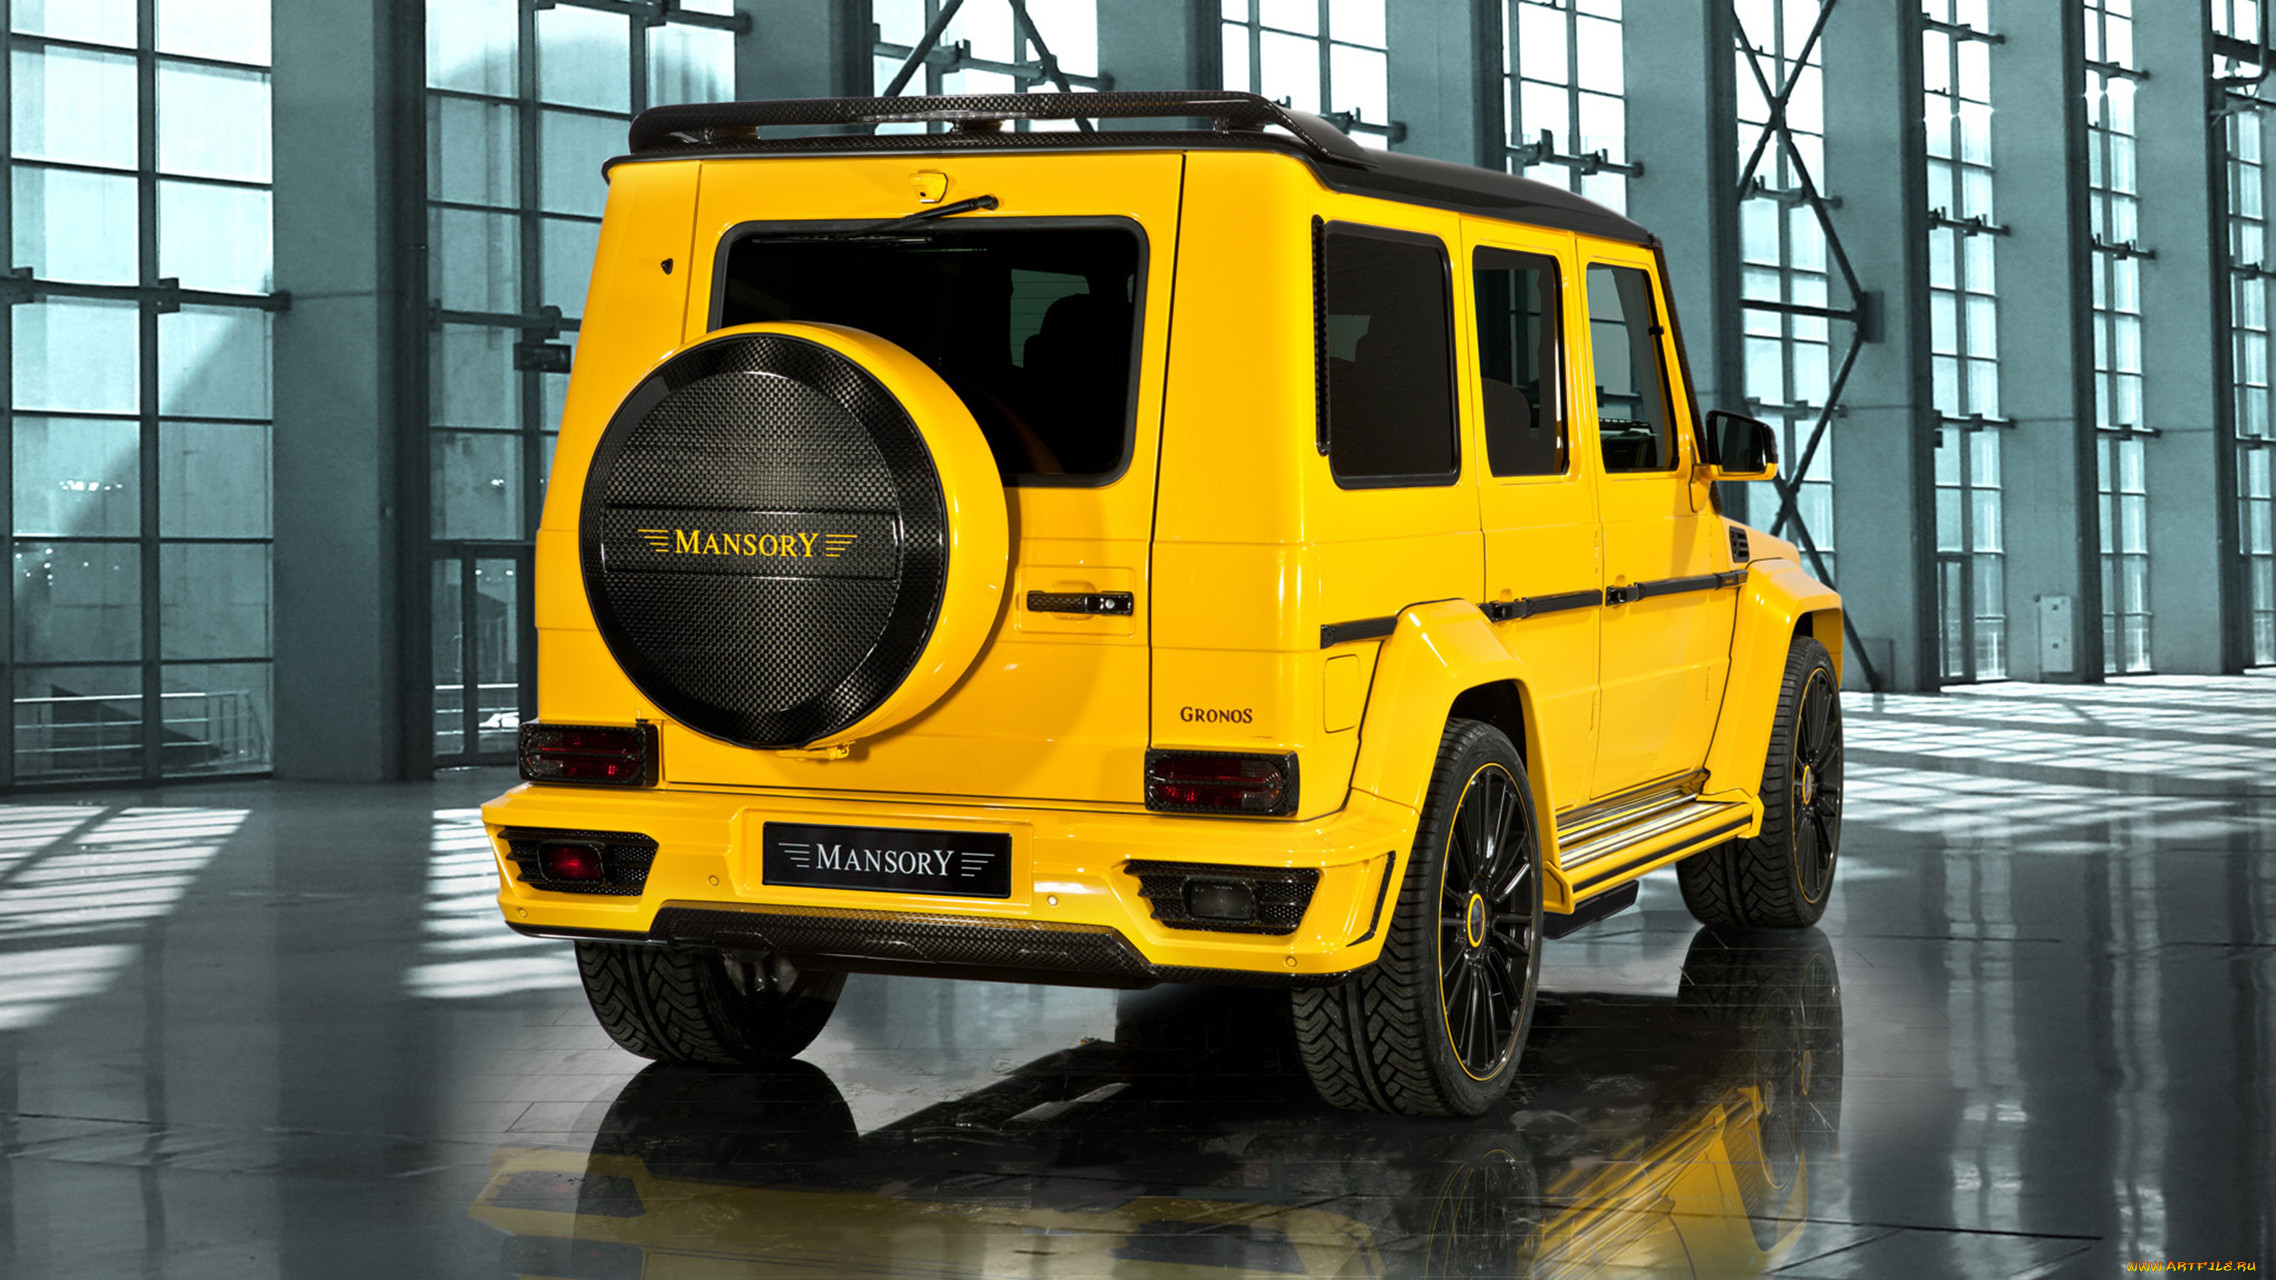 mansory gronos based on mercedes-benz g-class amg 2013, , mercedes-benz, mansory, gronos, based, g-class, amg, 2013